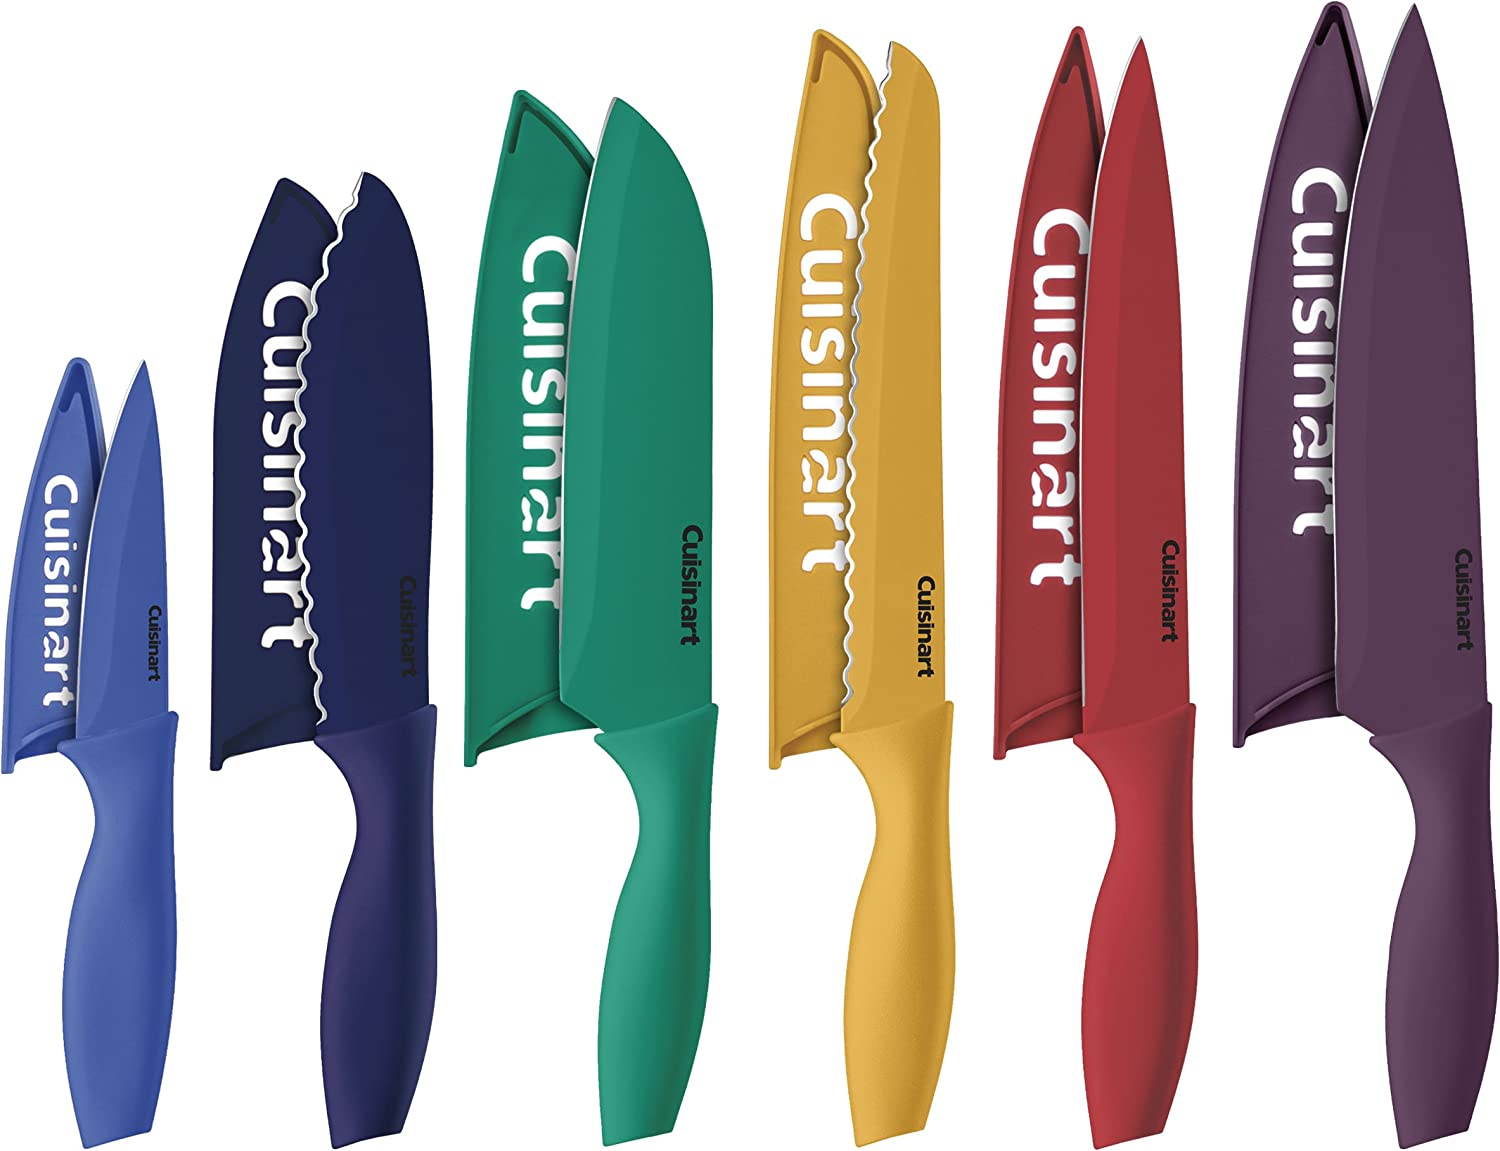 Review of Cuisinart C55-12PCKSAM 12-Piece Ceramic Coated Stainless Steel Knives